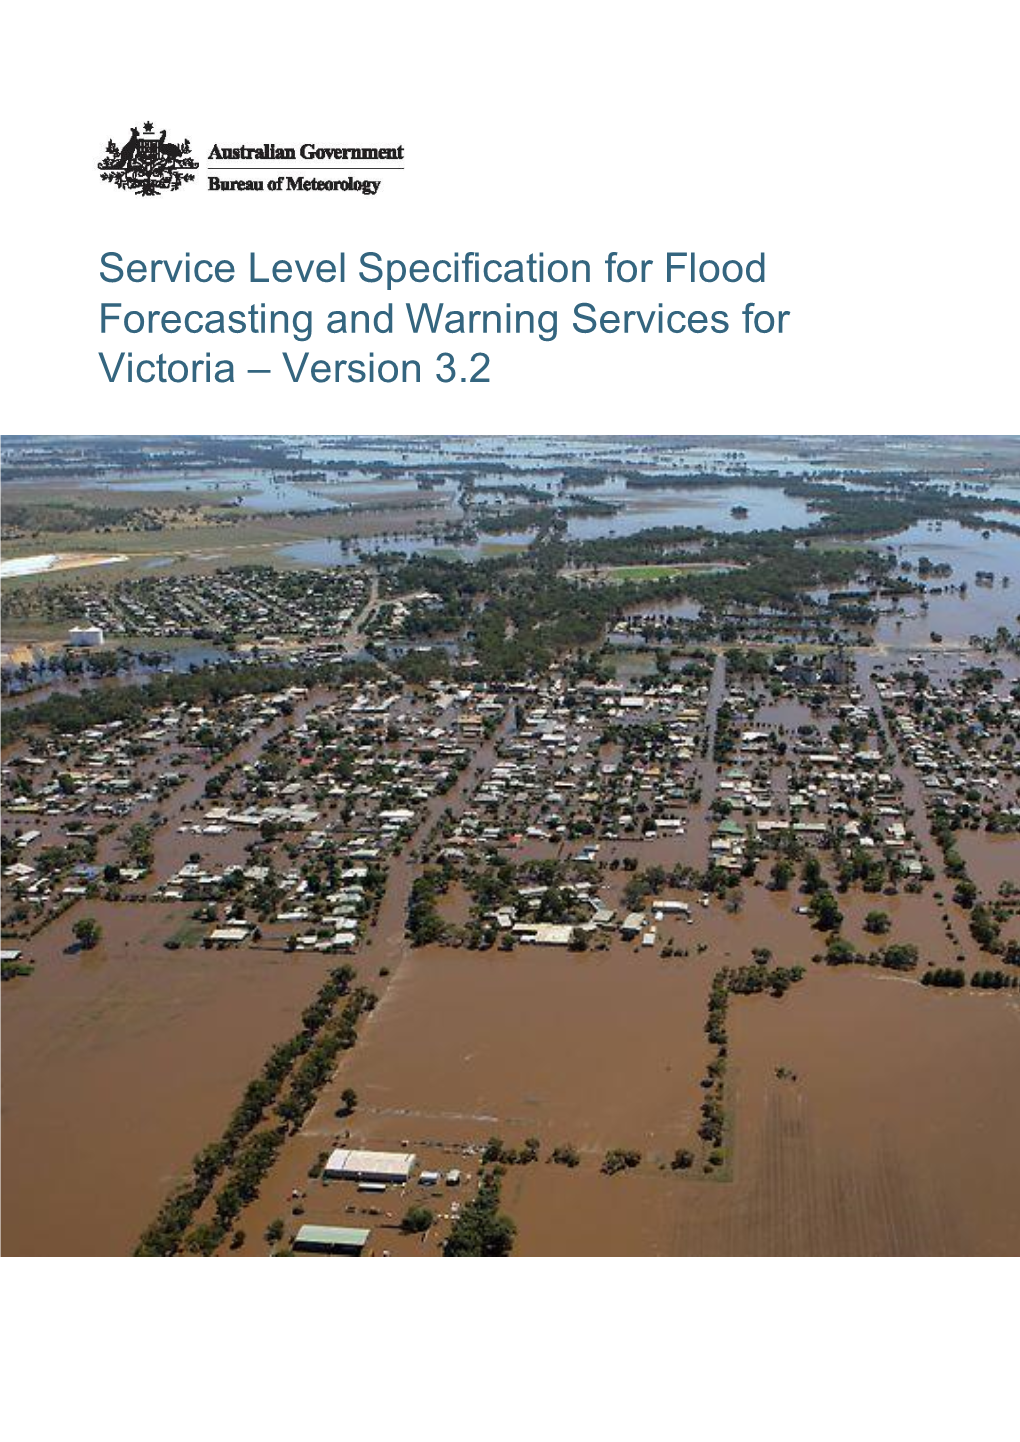 Service Level Specification for Flood Forecasting and Warning Services for Victoria – Version 3.2